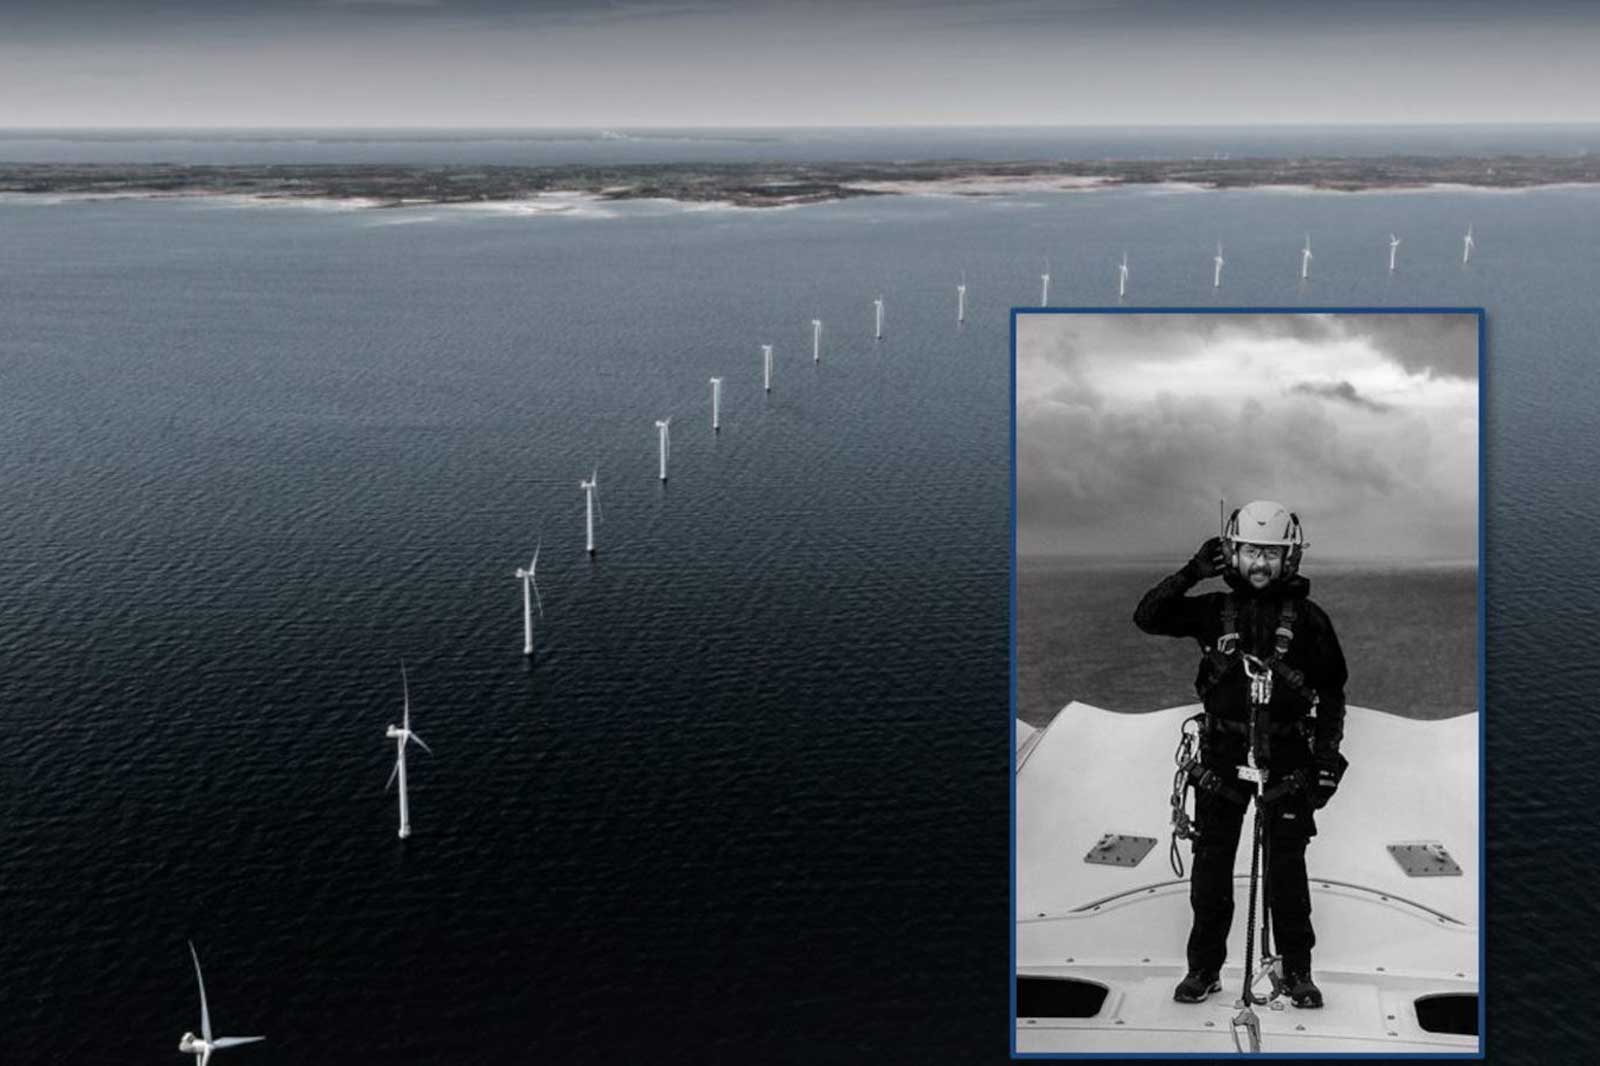 “Nature and our turbines decide what work needs to be done”